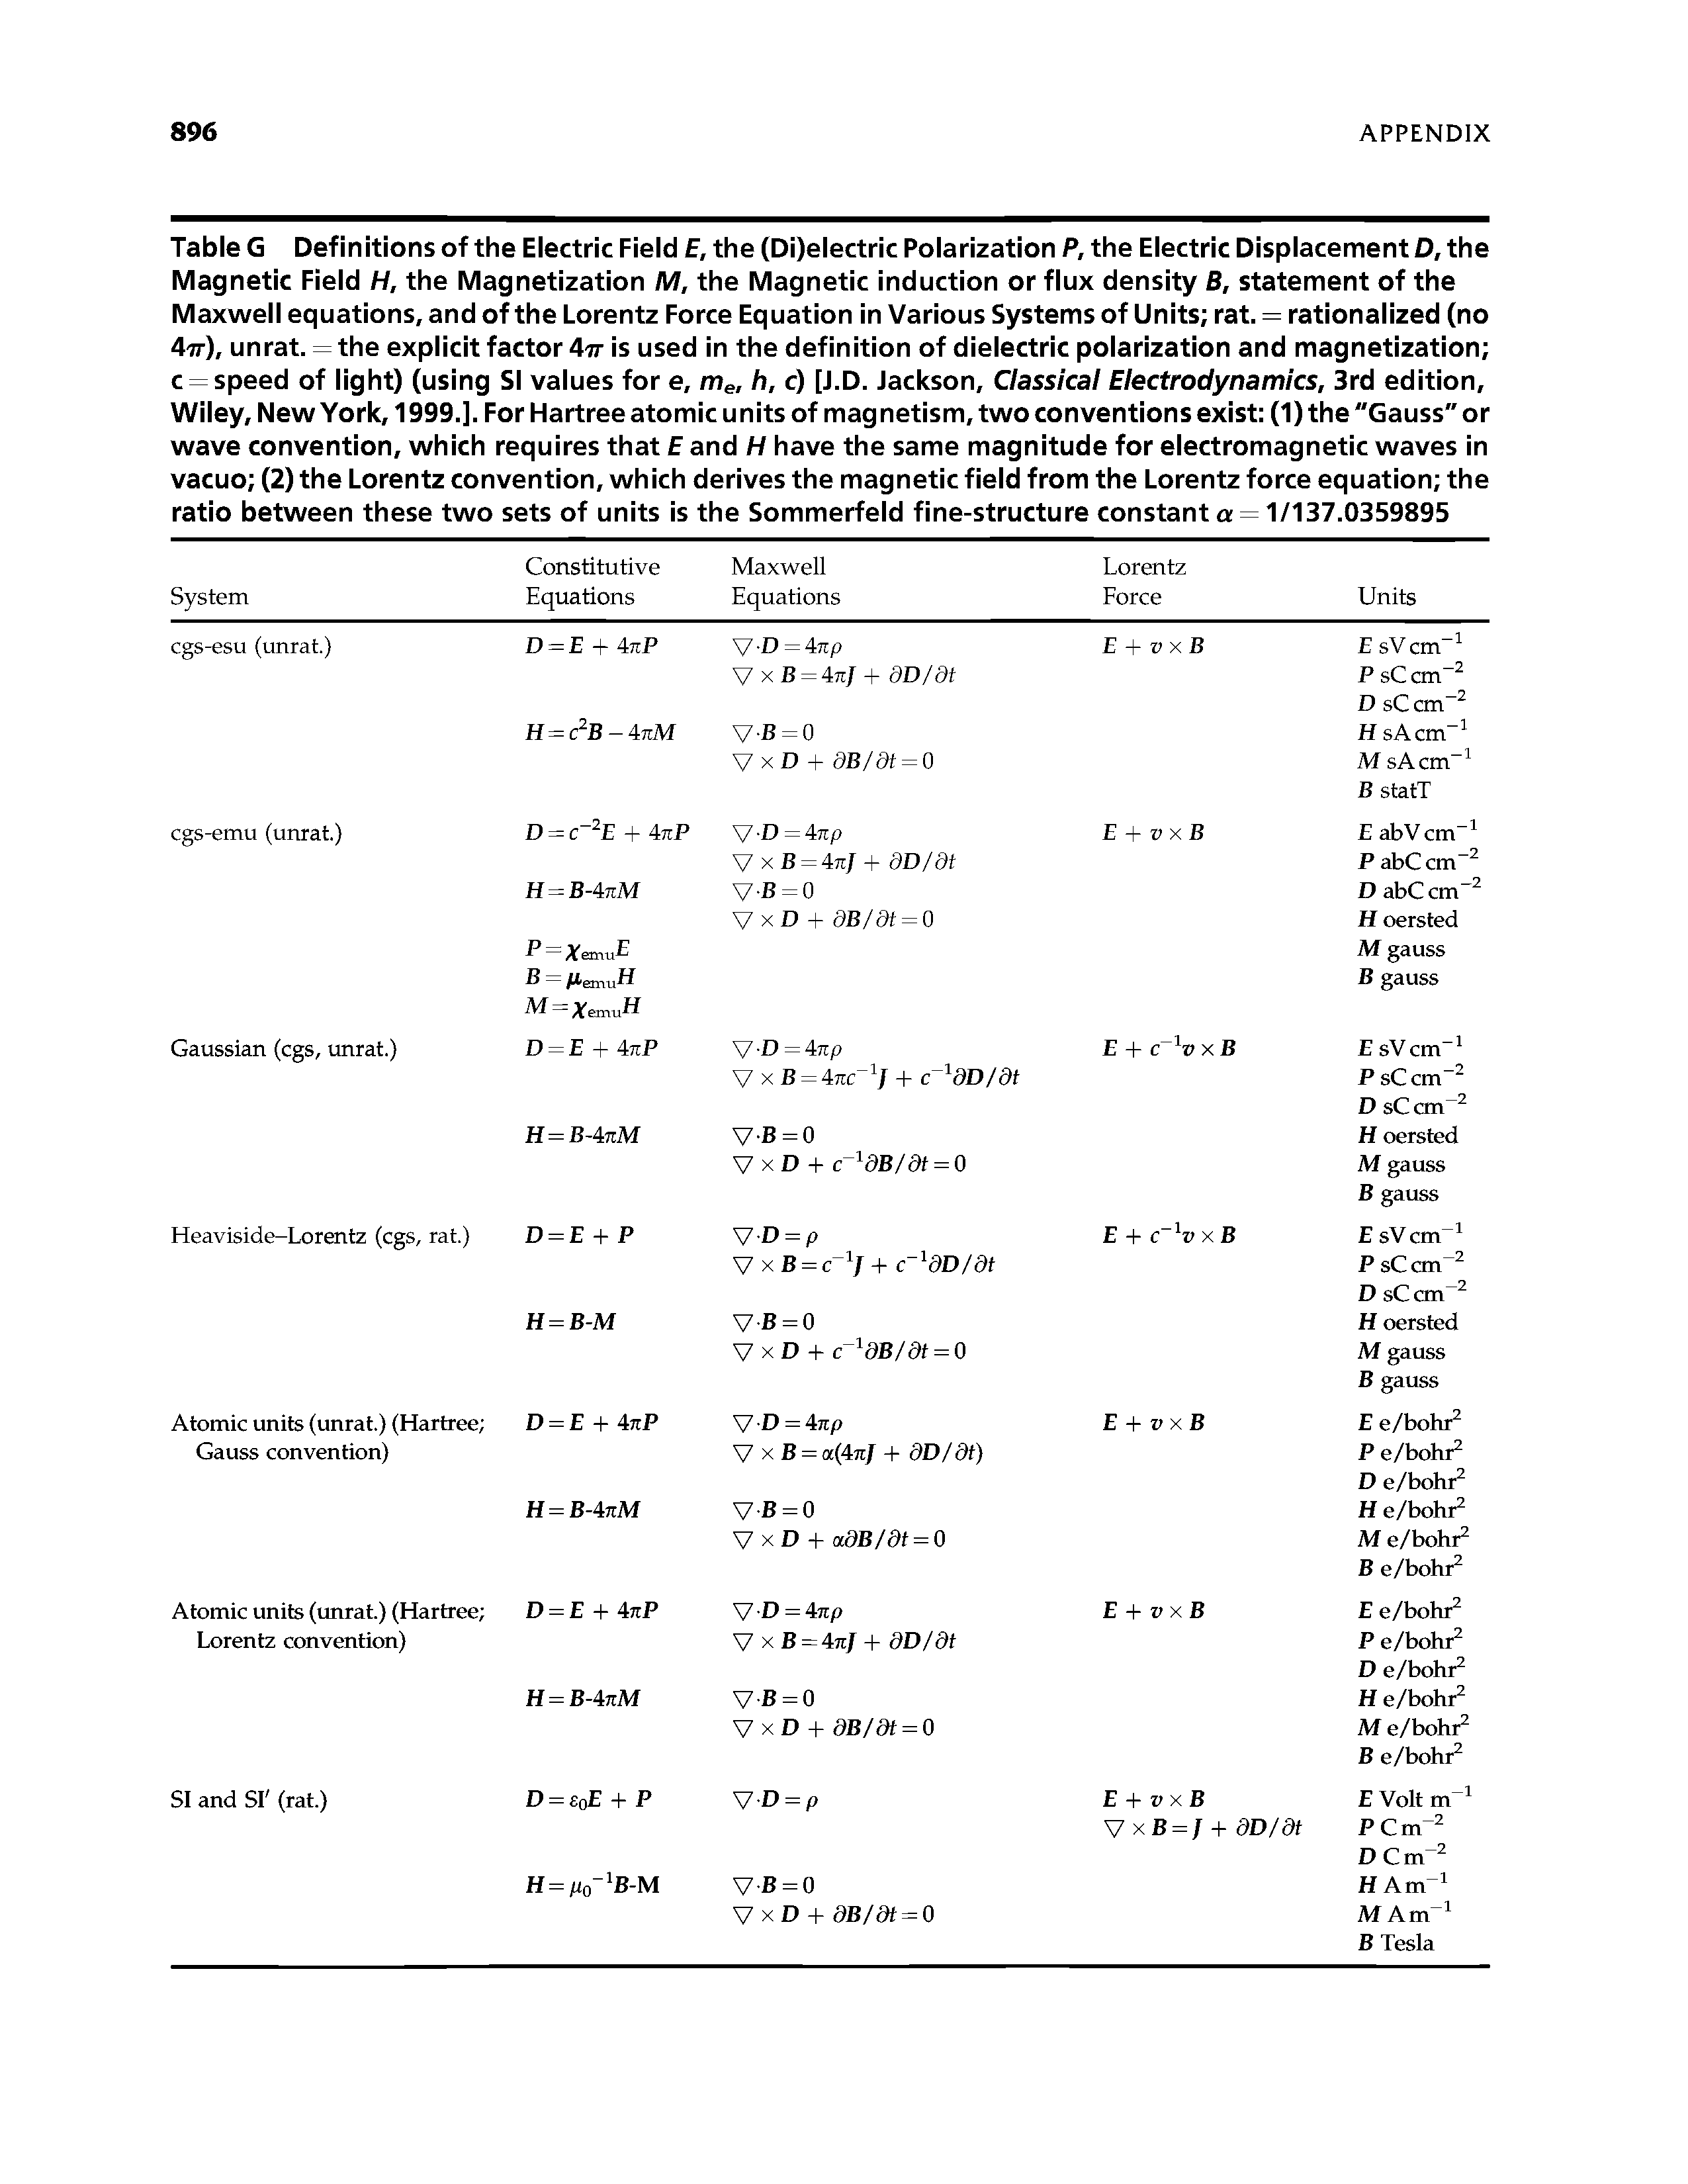 Table G Definitions of the Electric Field E, the (Di)electric Polarization P, the Electric Displacement D, the Magnetic Field H, the Magnetization M, the Magnetic induction or flux density B, statement of the Maxwell equations, and of the Lorentz Force Equation in Various Systems of Units rat. = rationalized (no 477-), unrat. = the explicit factor 477- is used in the definition of dielectric polarization and magnetization c = speed of light) (using SI values for e, me, h, c) [J.D. Jackson, Classical Electrodynamics, 3rd edition, Wiley, New York, 1999.]. For Hartree atomic u nits of mag netism, two conventions exist (1) the "Gauss" or wave convention, which requires that E and H have the same magnitude for electromagnetic waves in vacuo (2) the Lorentz convention, which derives the magnetic field from the Lorentz force equation the ratio between these two sets of units is the Sommerfeld fine-structure constant a = 1/137.0359895...